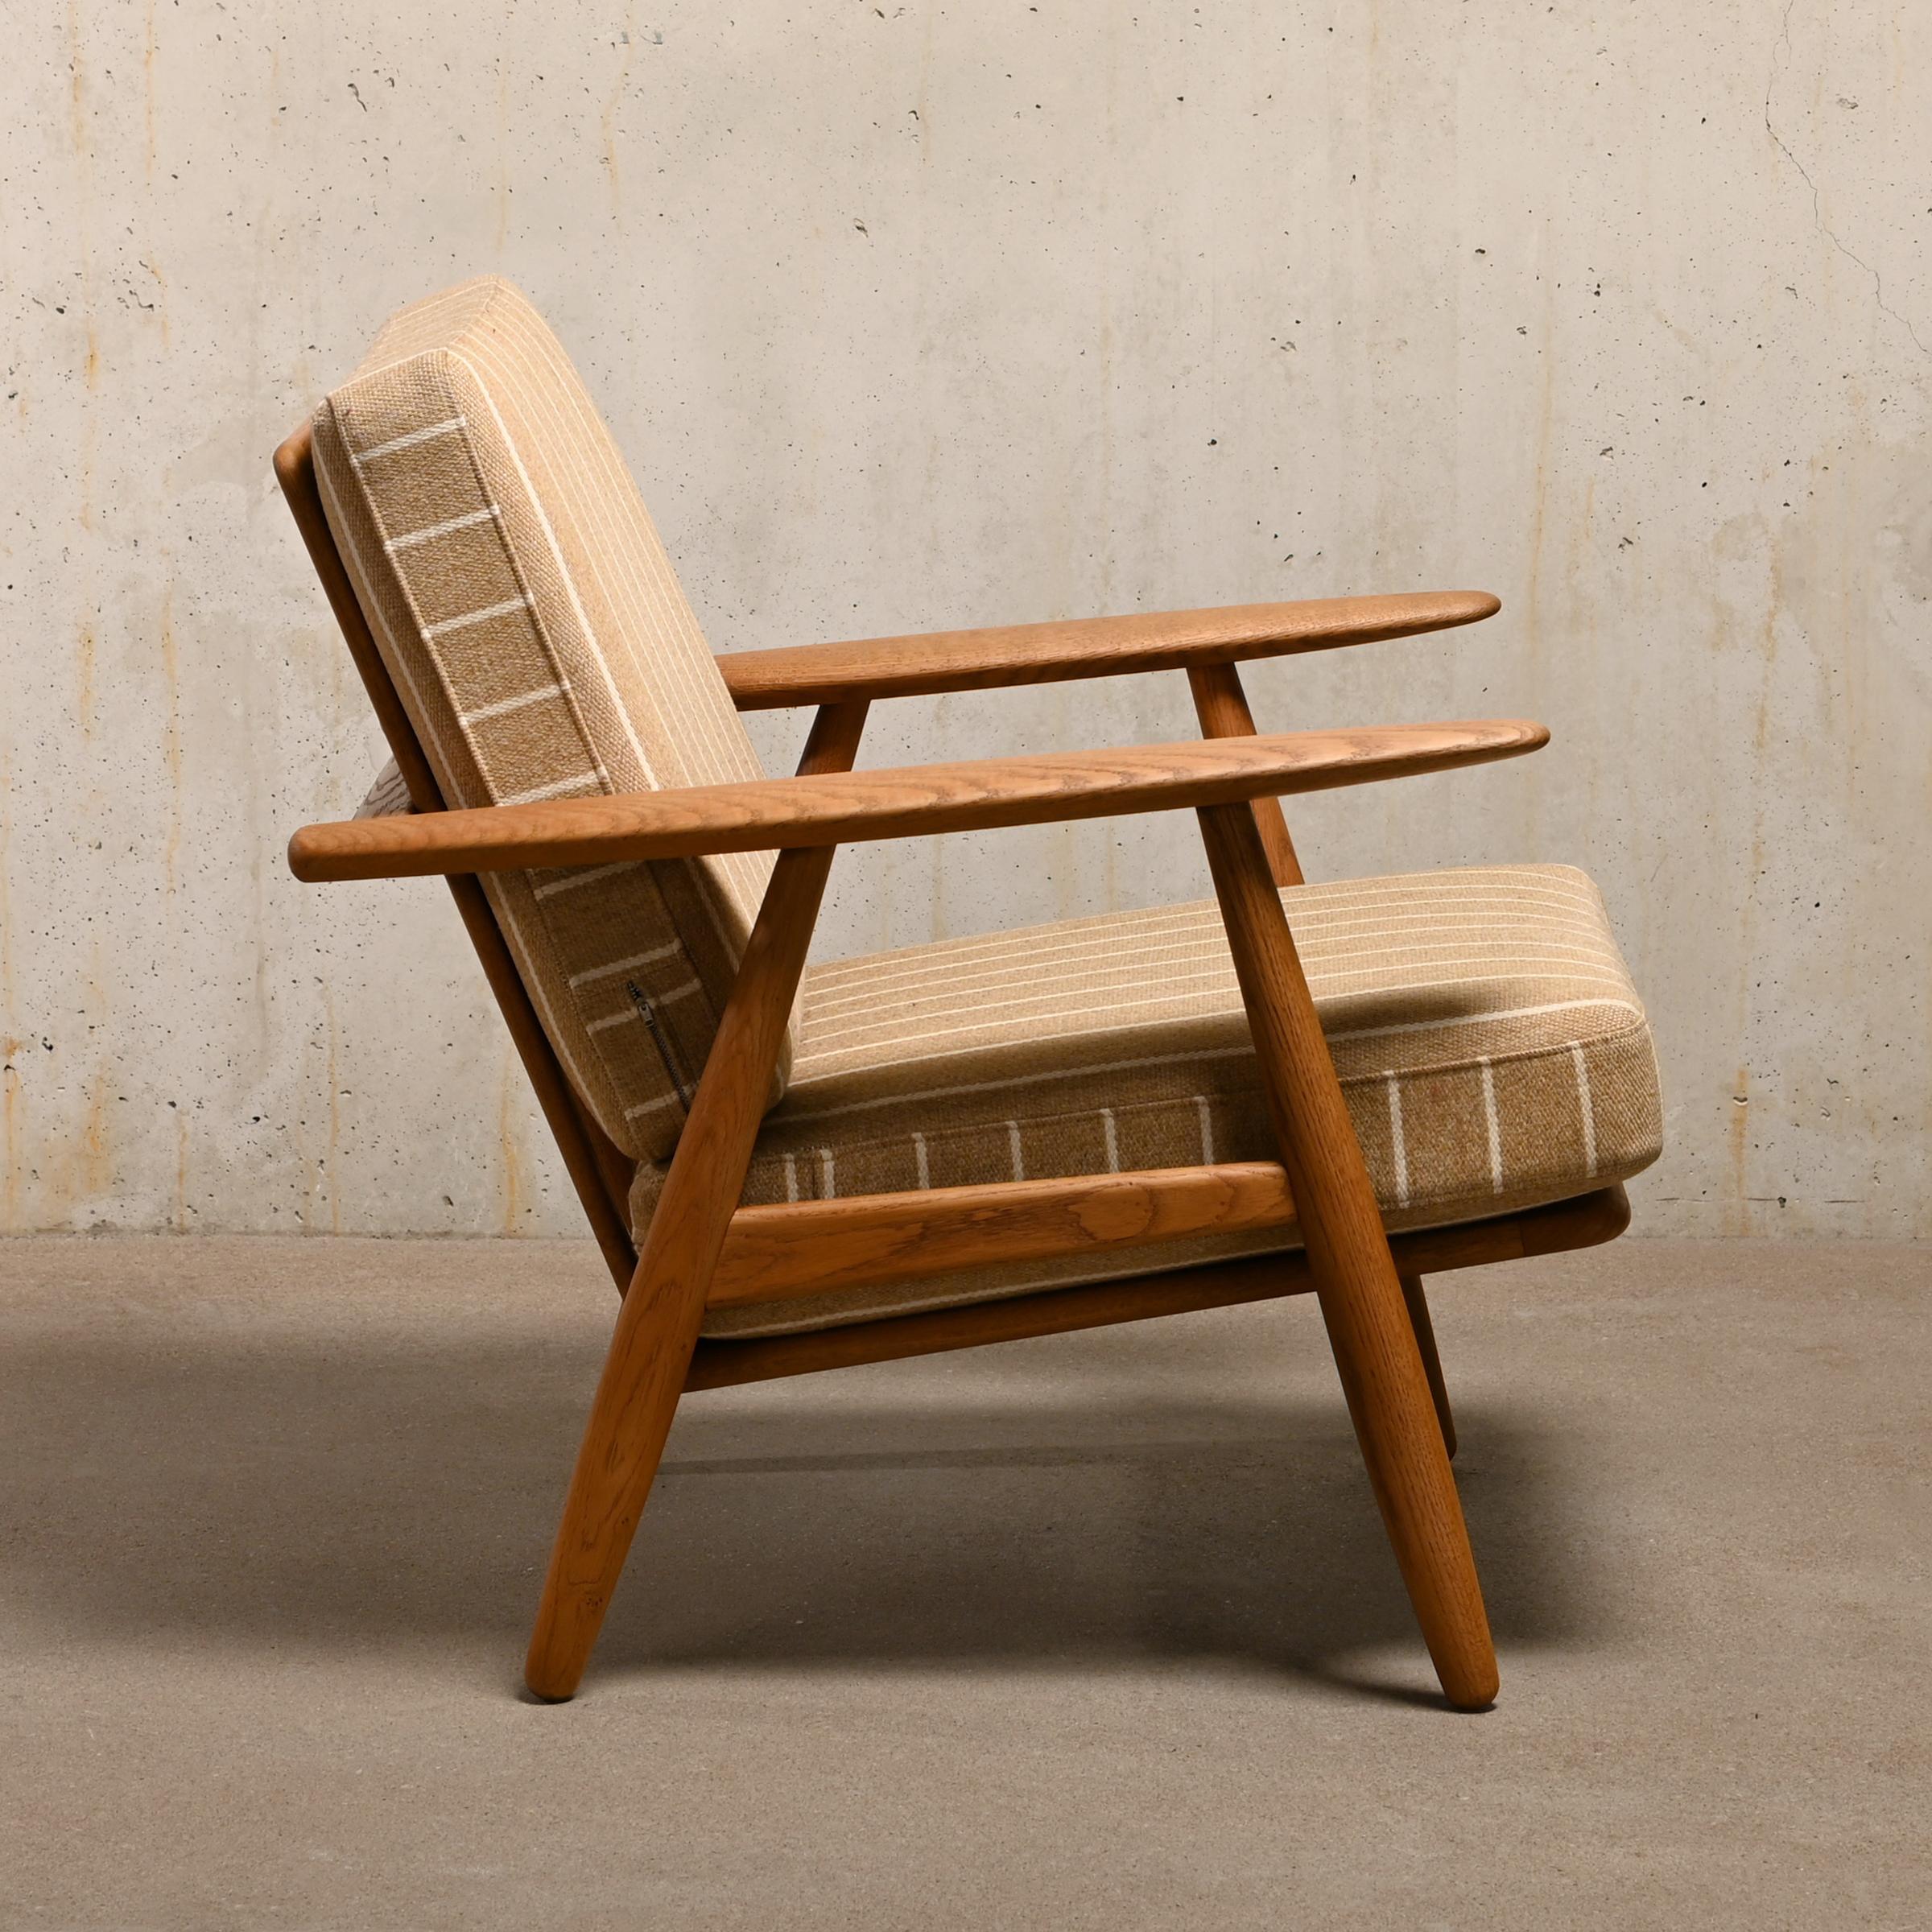 This is an early example of the Hans J. Wegner Lounge Chair model GE240 for GETAMA, Denmark. The chair is also sometimes called Cigar Chair due the shape of the armrests. Beautiful aged and grained high quality oak wooden frame in very good